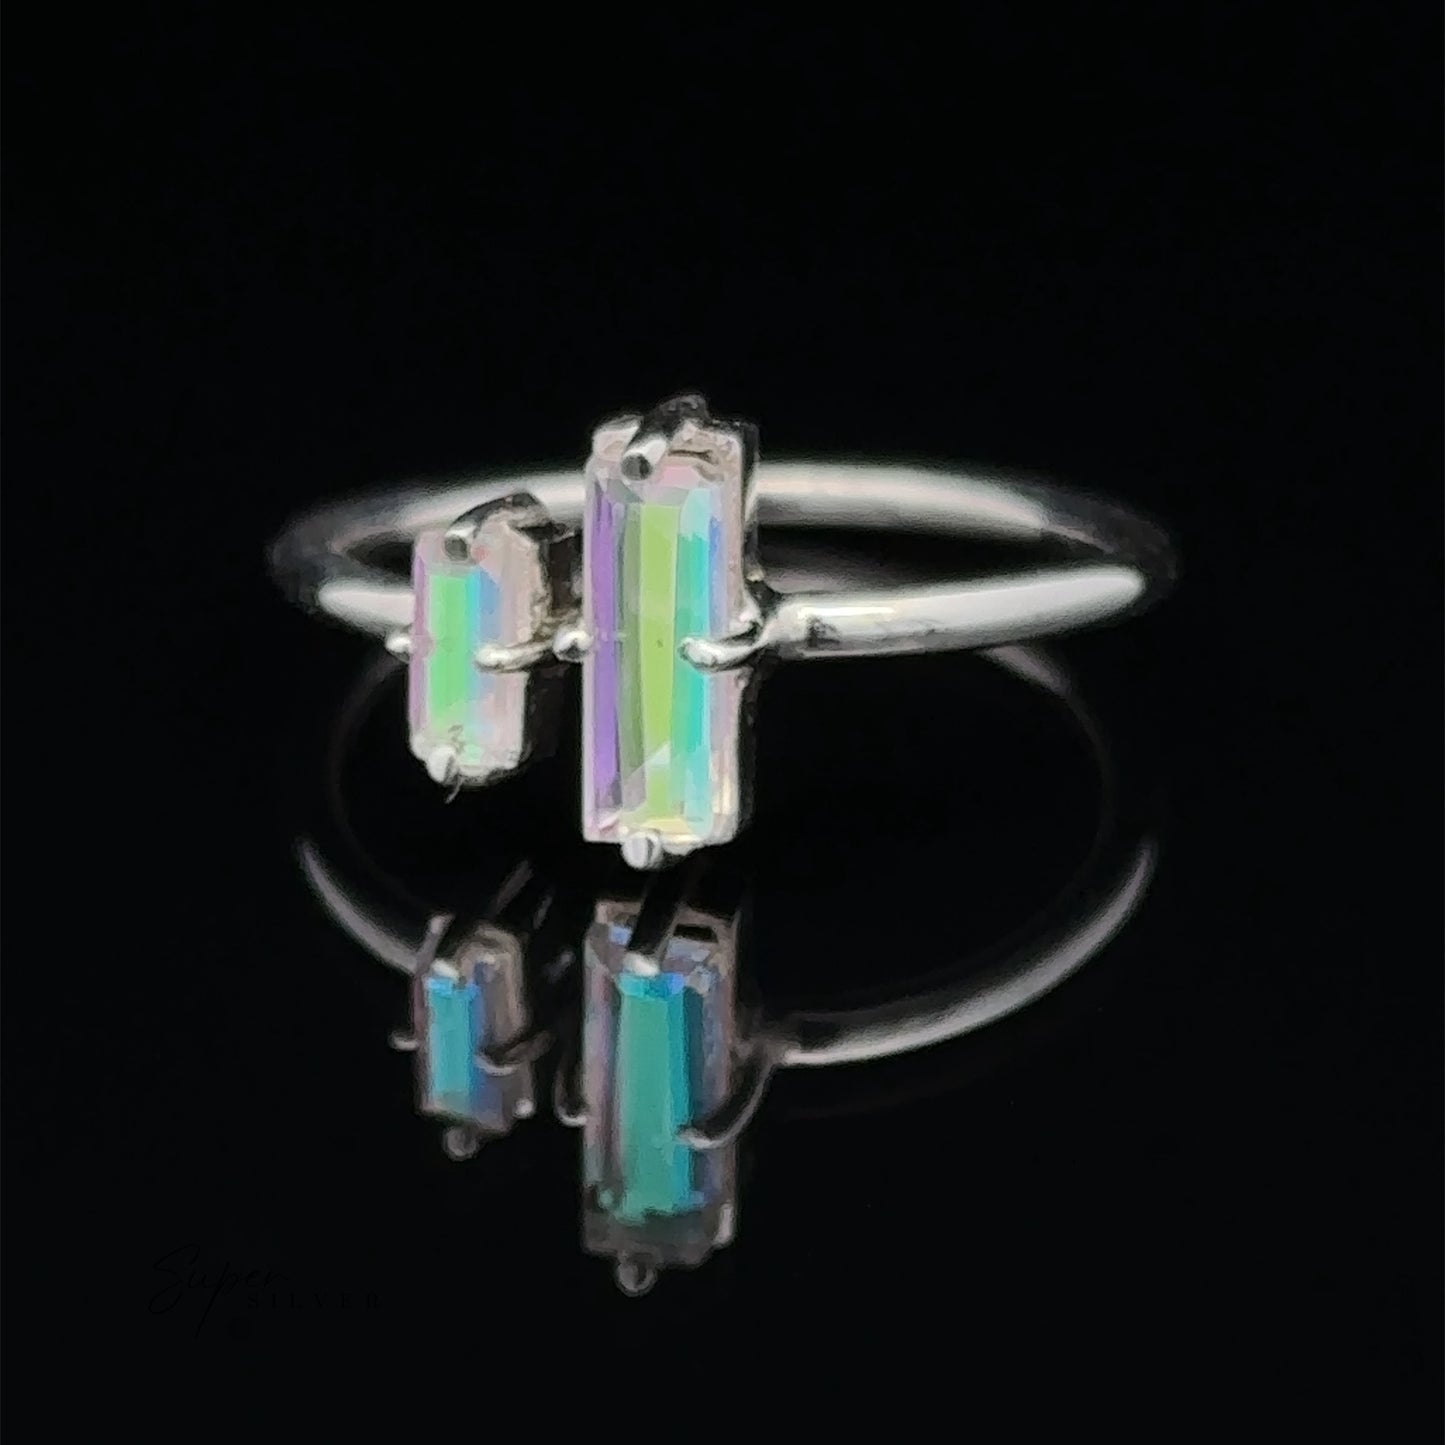 The Online Only Exclusive Adjustable Crystal Ring features three vertical, rectangular, multi-colored gemstones displayed against a dark background with a reflection below.